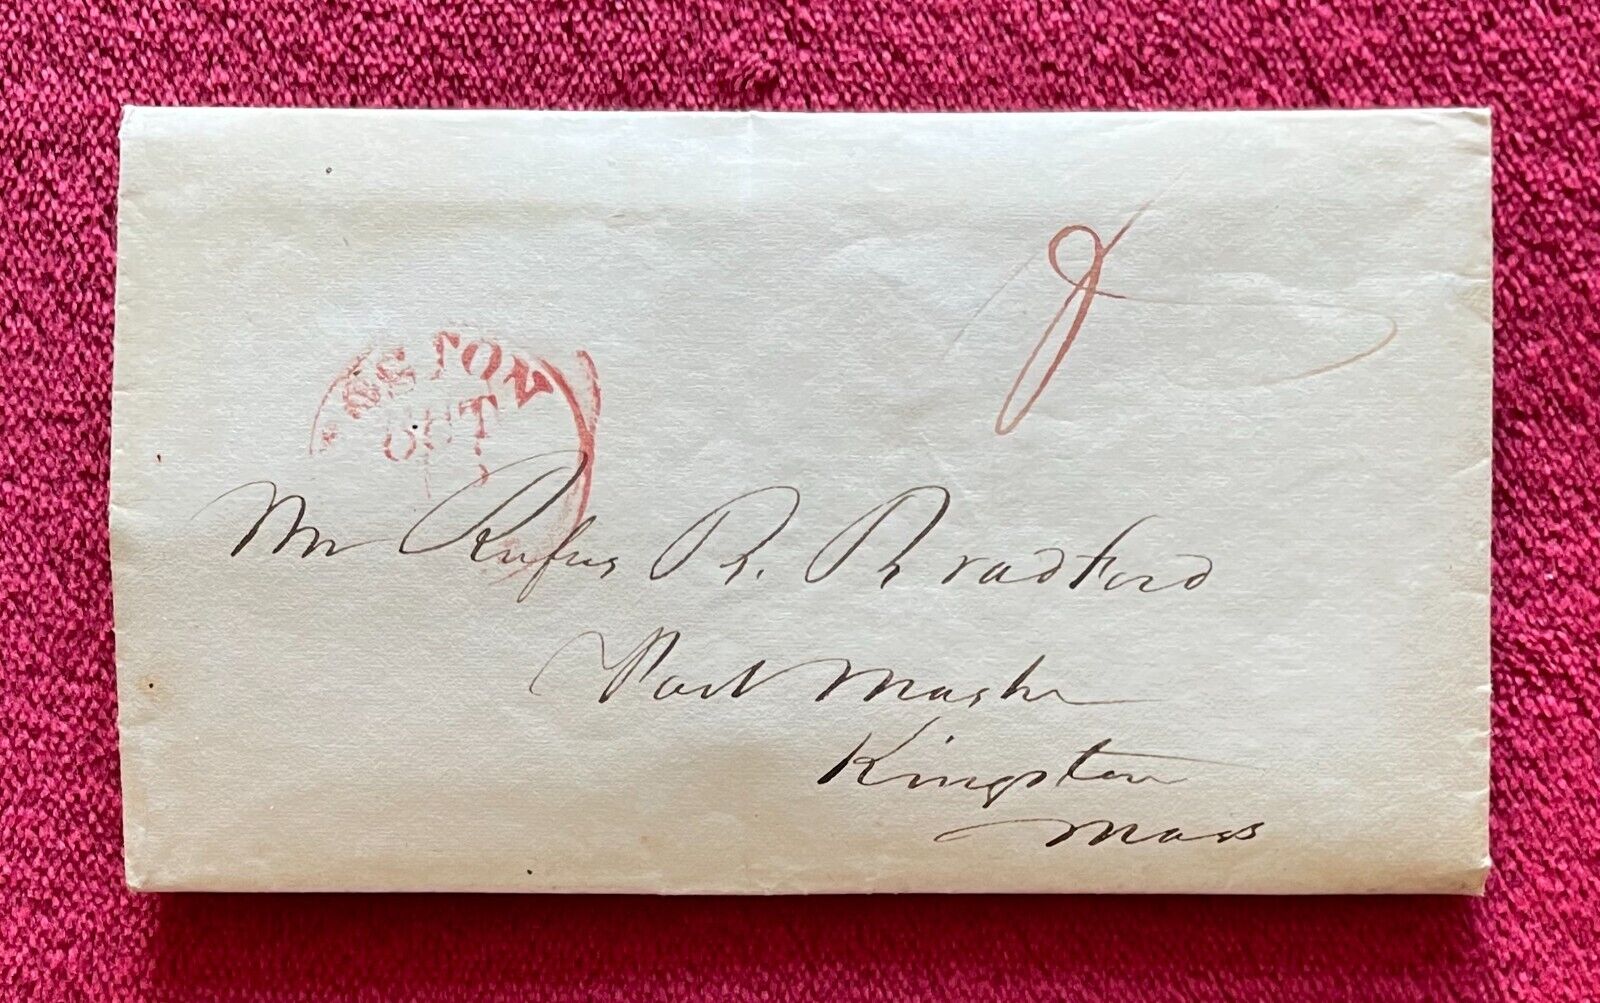 1831 STAMPLESS POSTAL COVER/LETTER TO RUFUS R. BRADFORD, POSTMASTER KINGSTON, MA